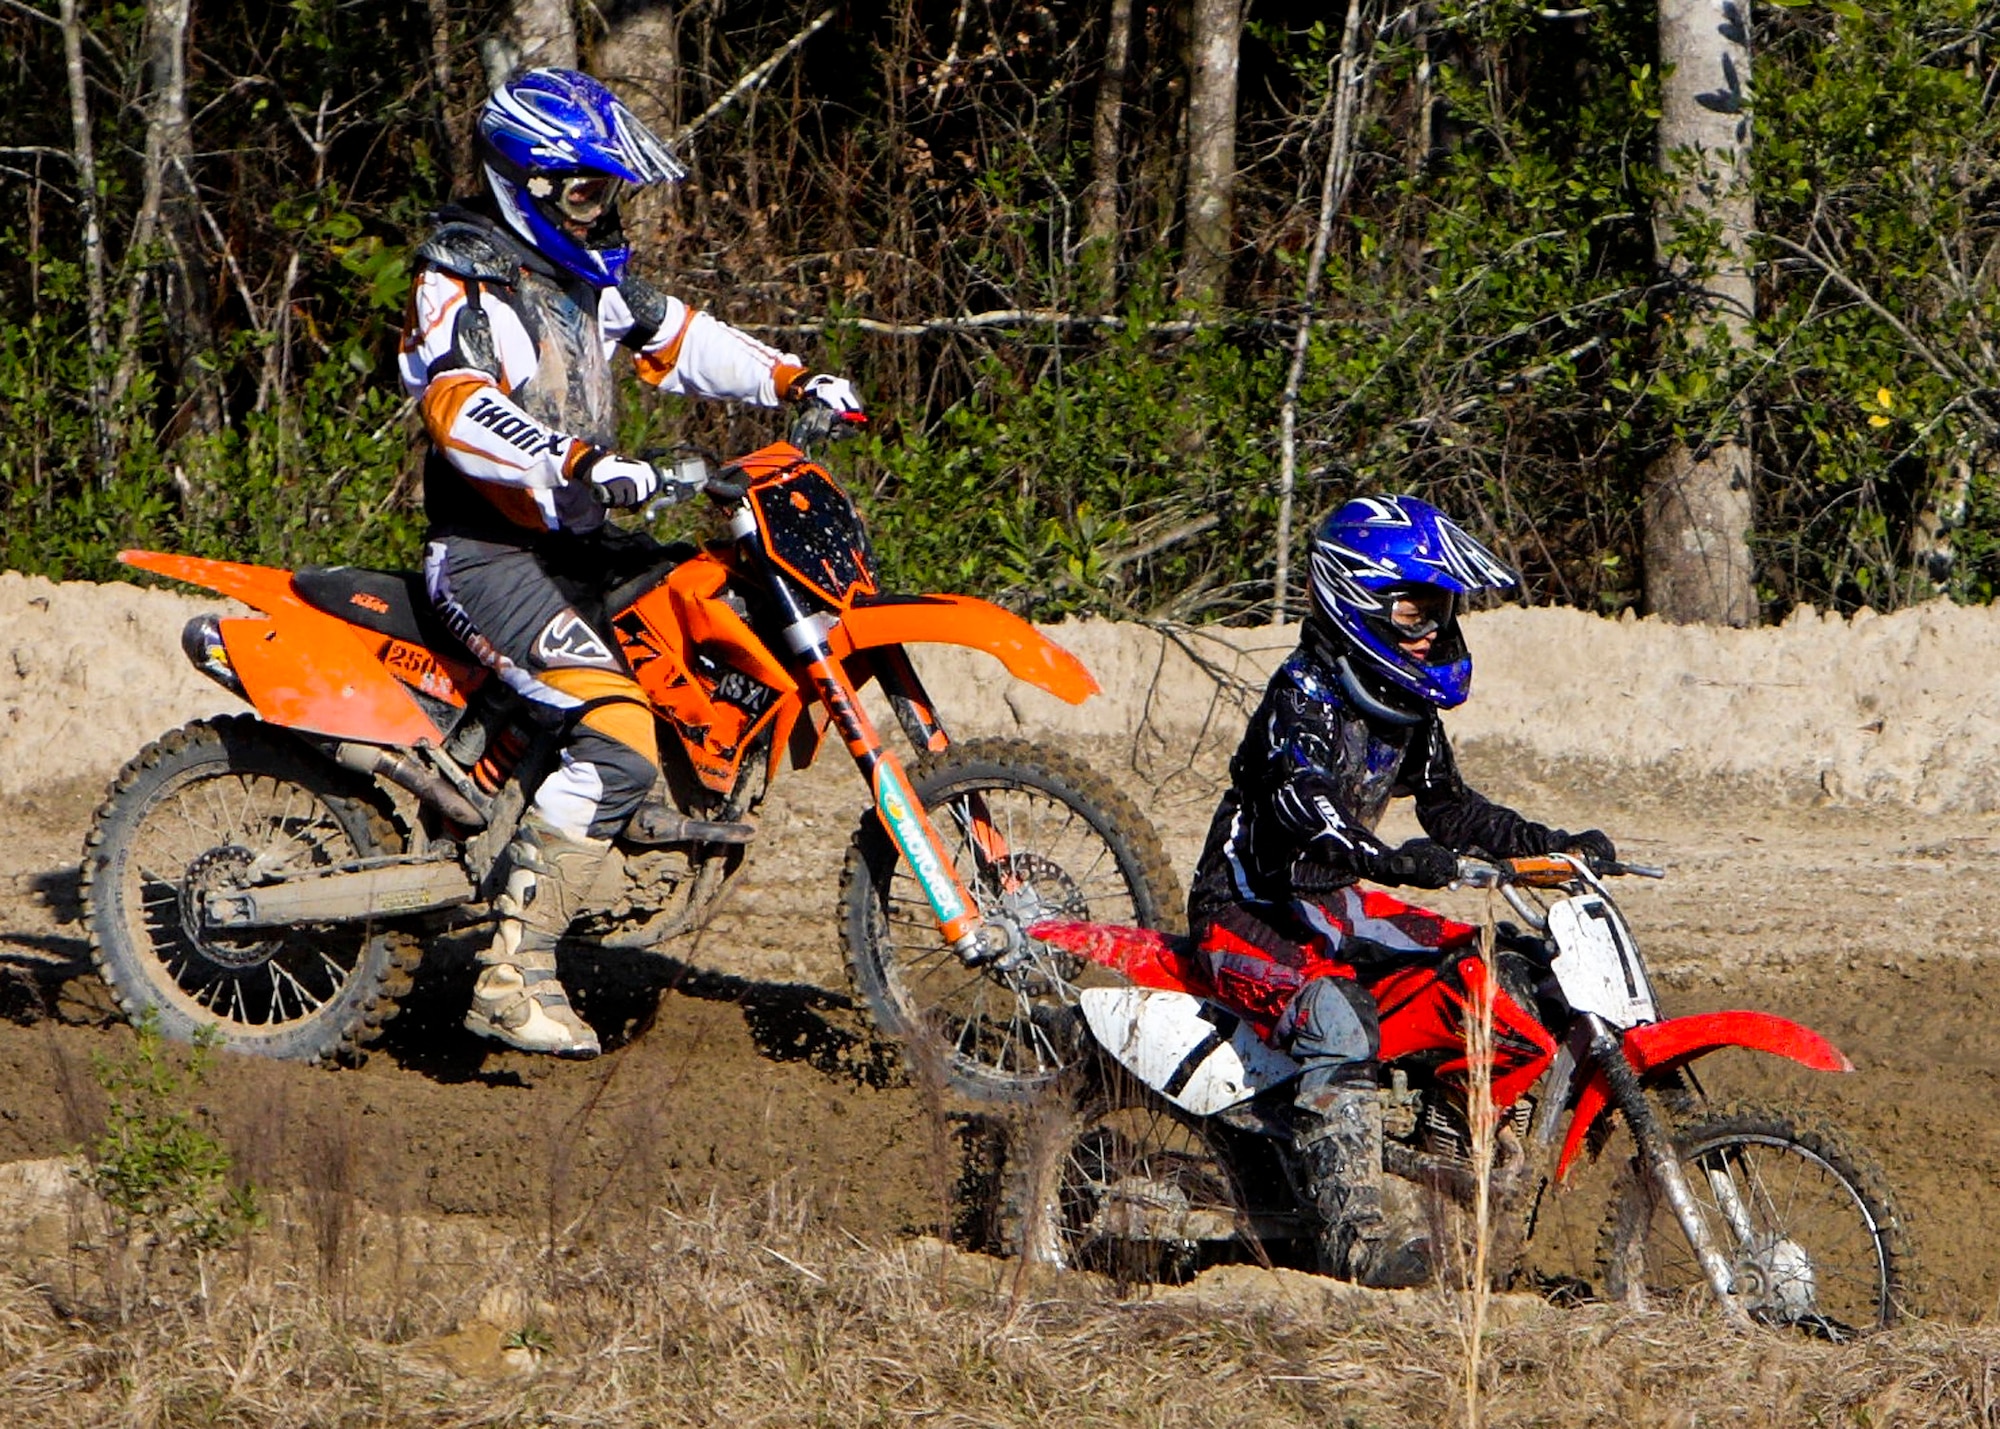 A day on the dirt bikes went off-course.  Charles Listak, of the 53rd Test Management Group, and his family were wrapping up a day at the dirt bike track when his son was injured in an accident.  His son ended up with both arms in casts.  (Courtesy photo) 